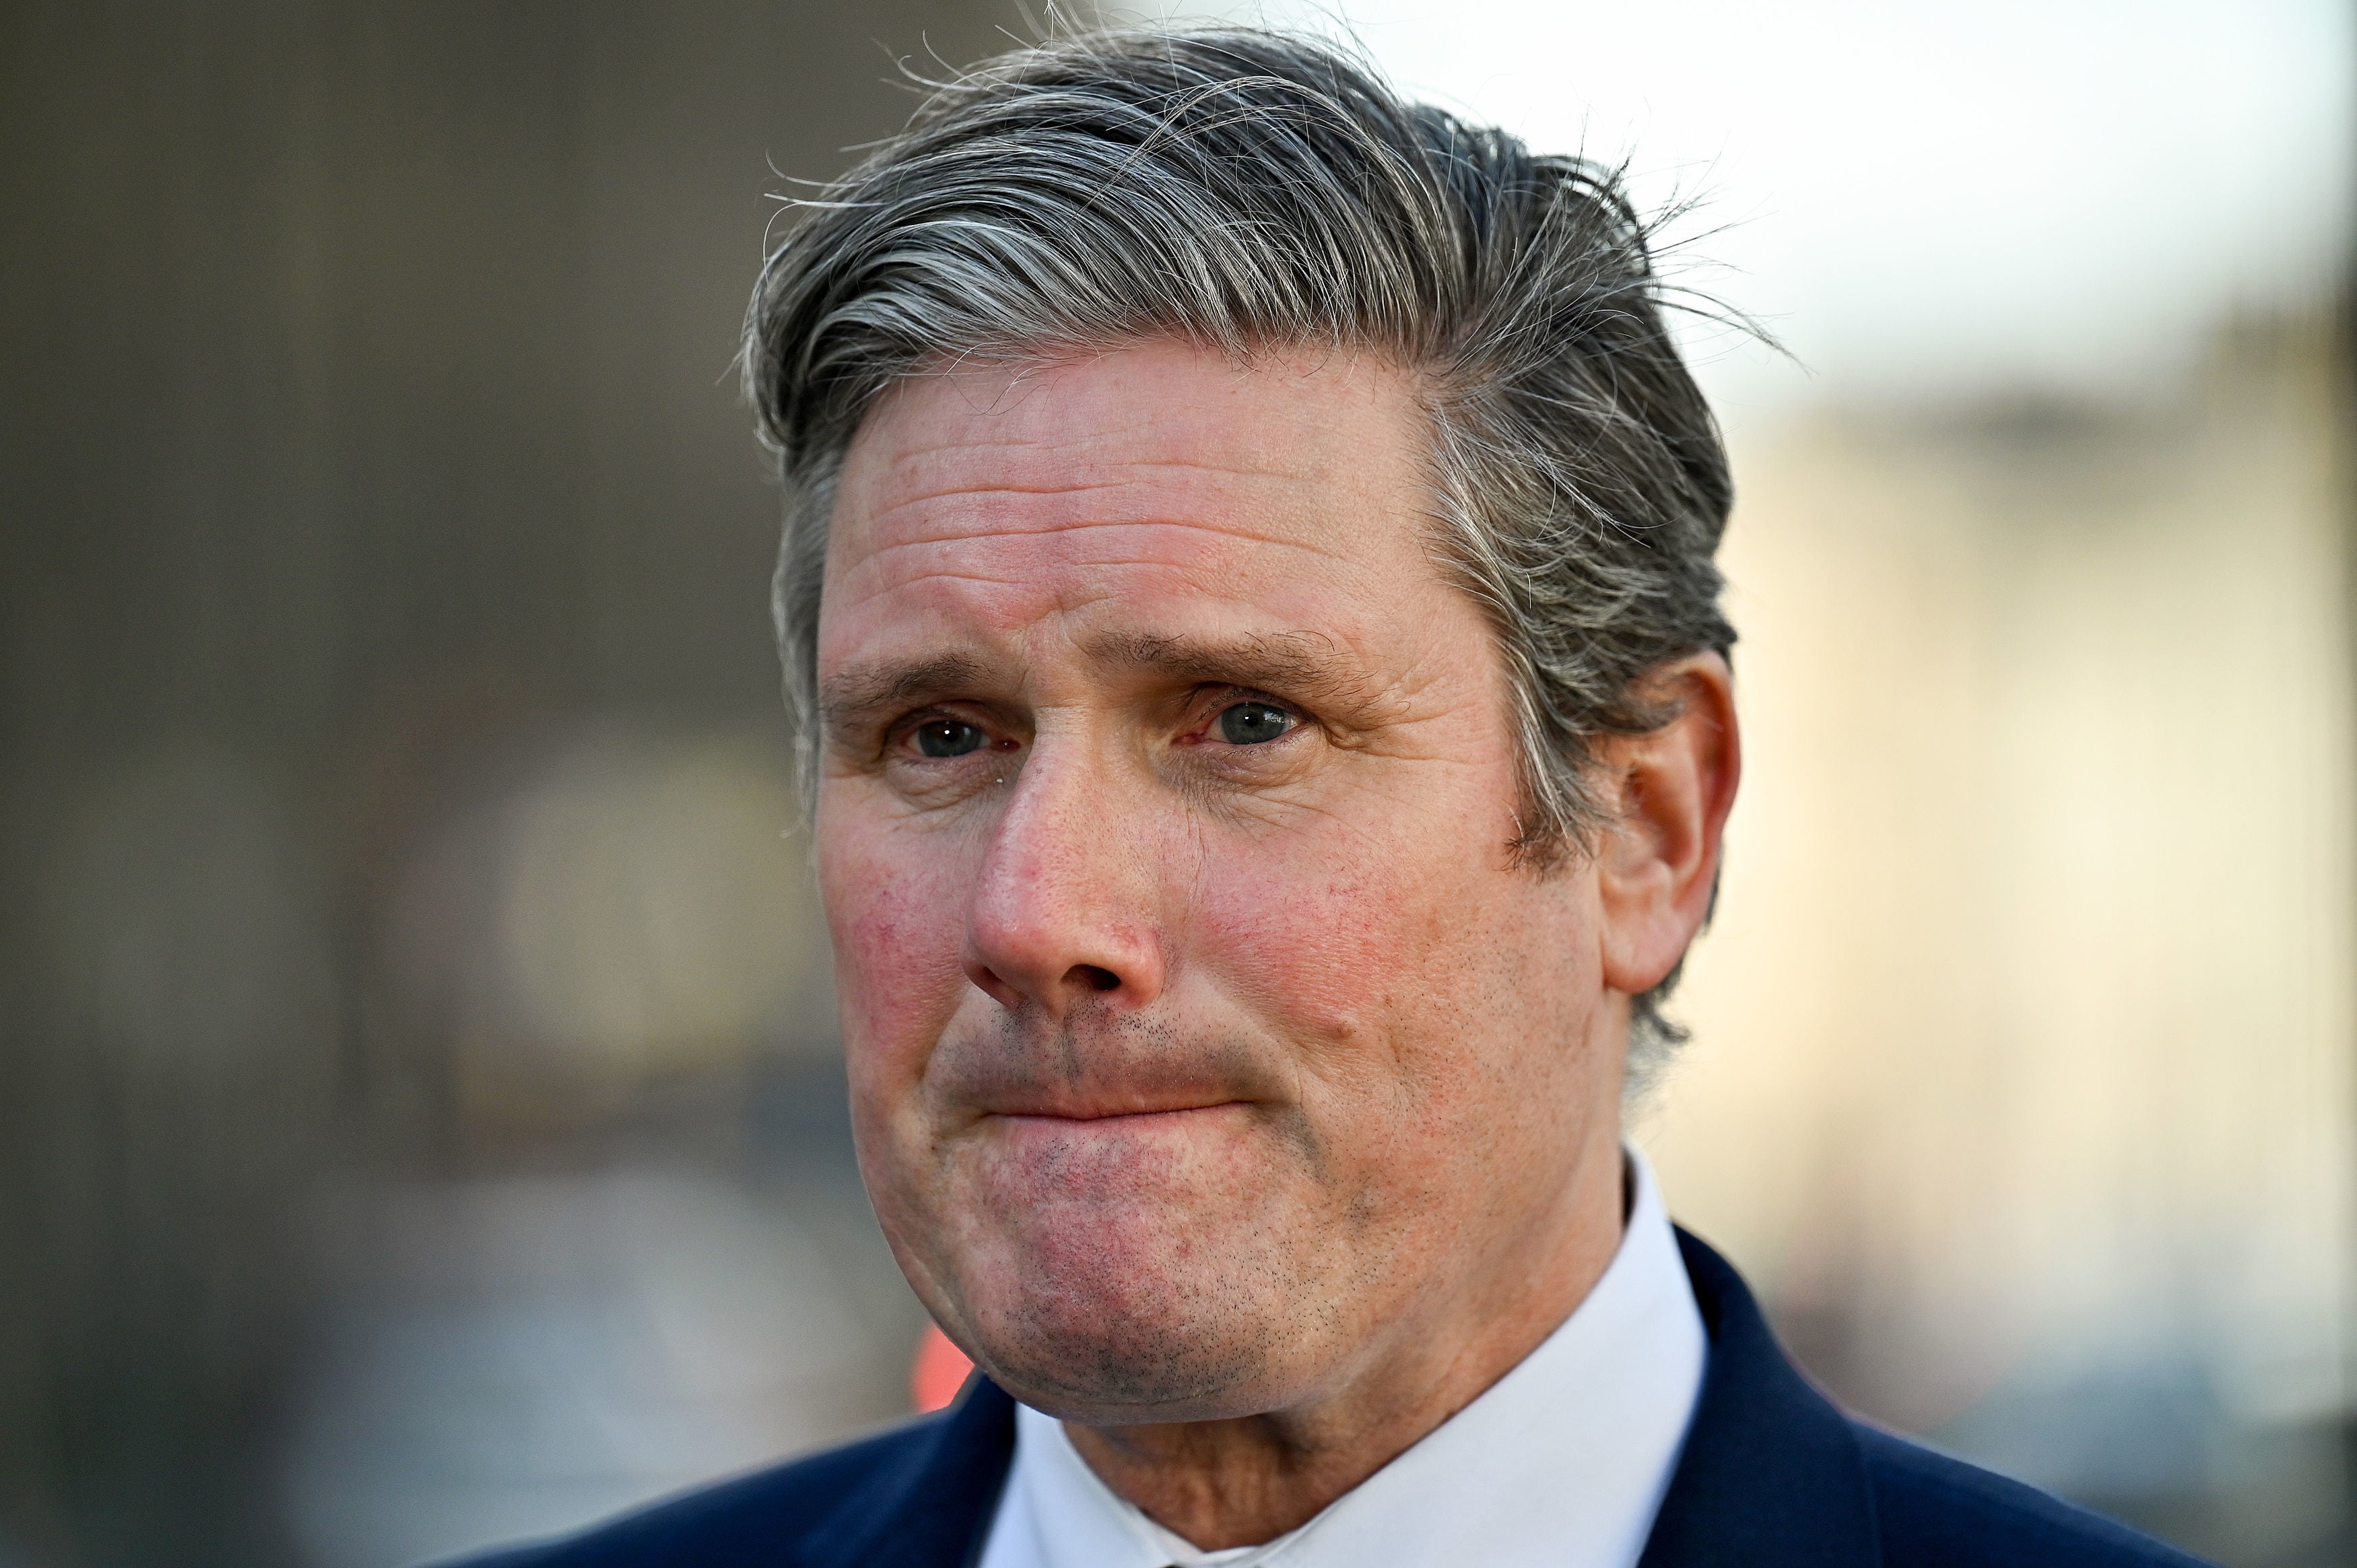 Keir Starmer echoes David Cameron, who told his party: ‘Stop banging on about Europe’